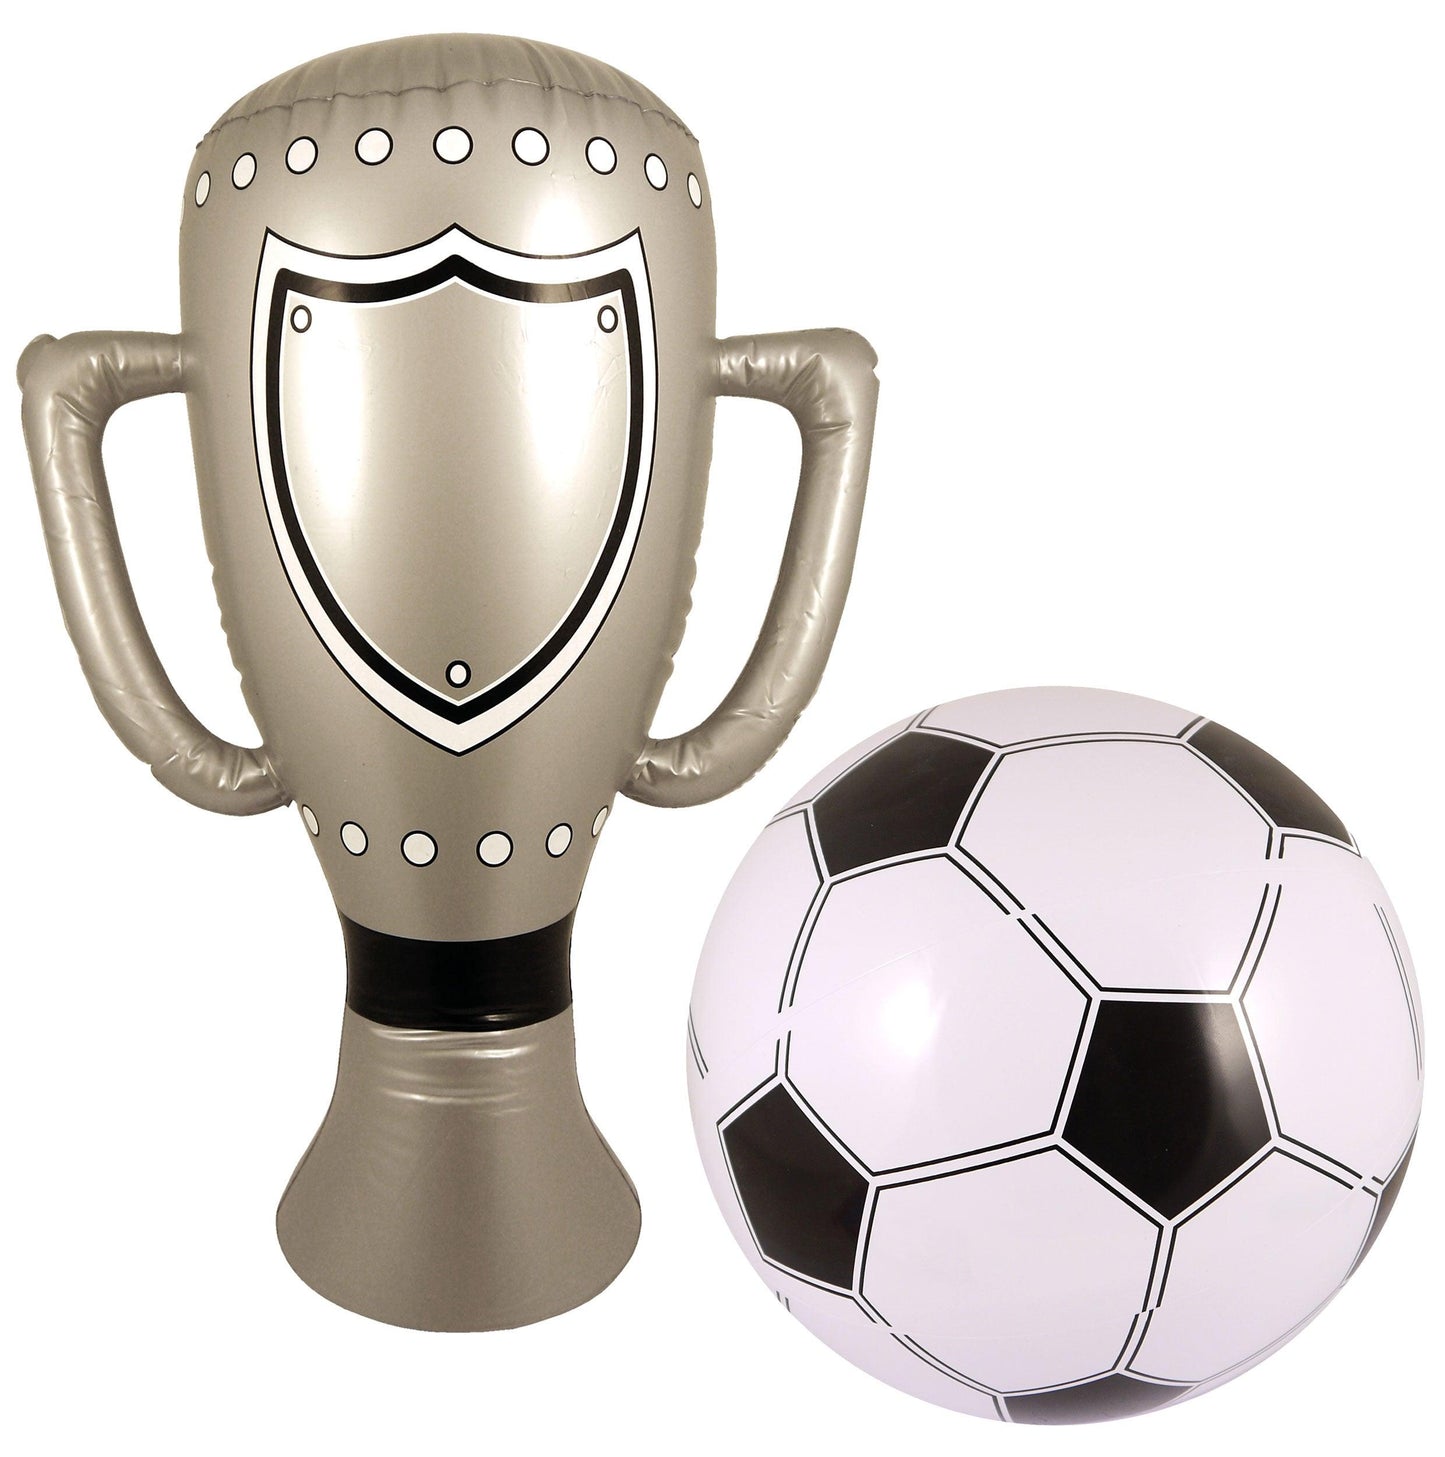 Inflatable Football Blow up with Silver Trophy Kids Toys Party Decoration Prop - Labreeze